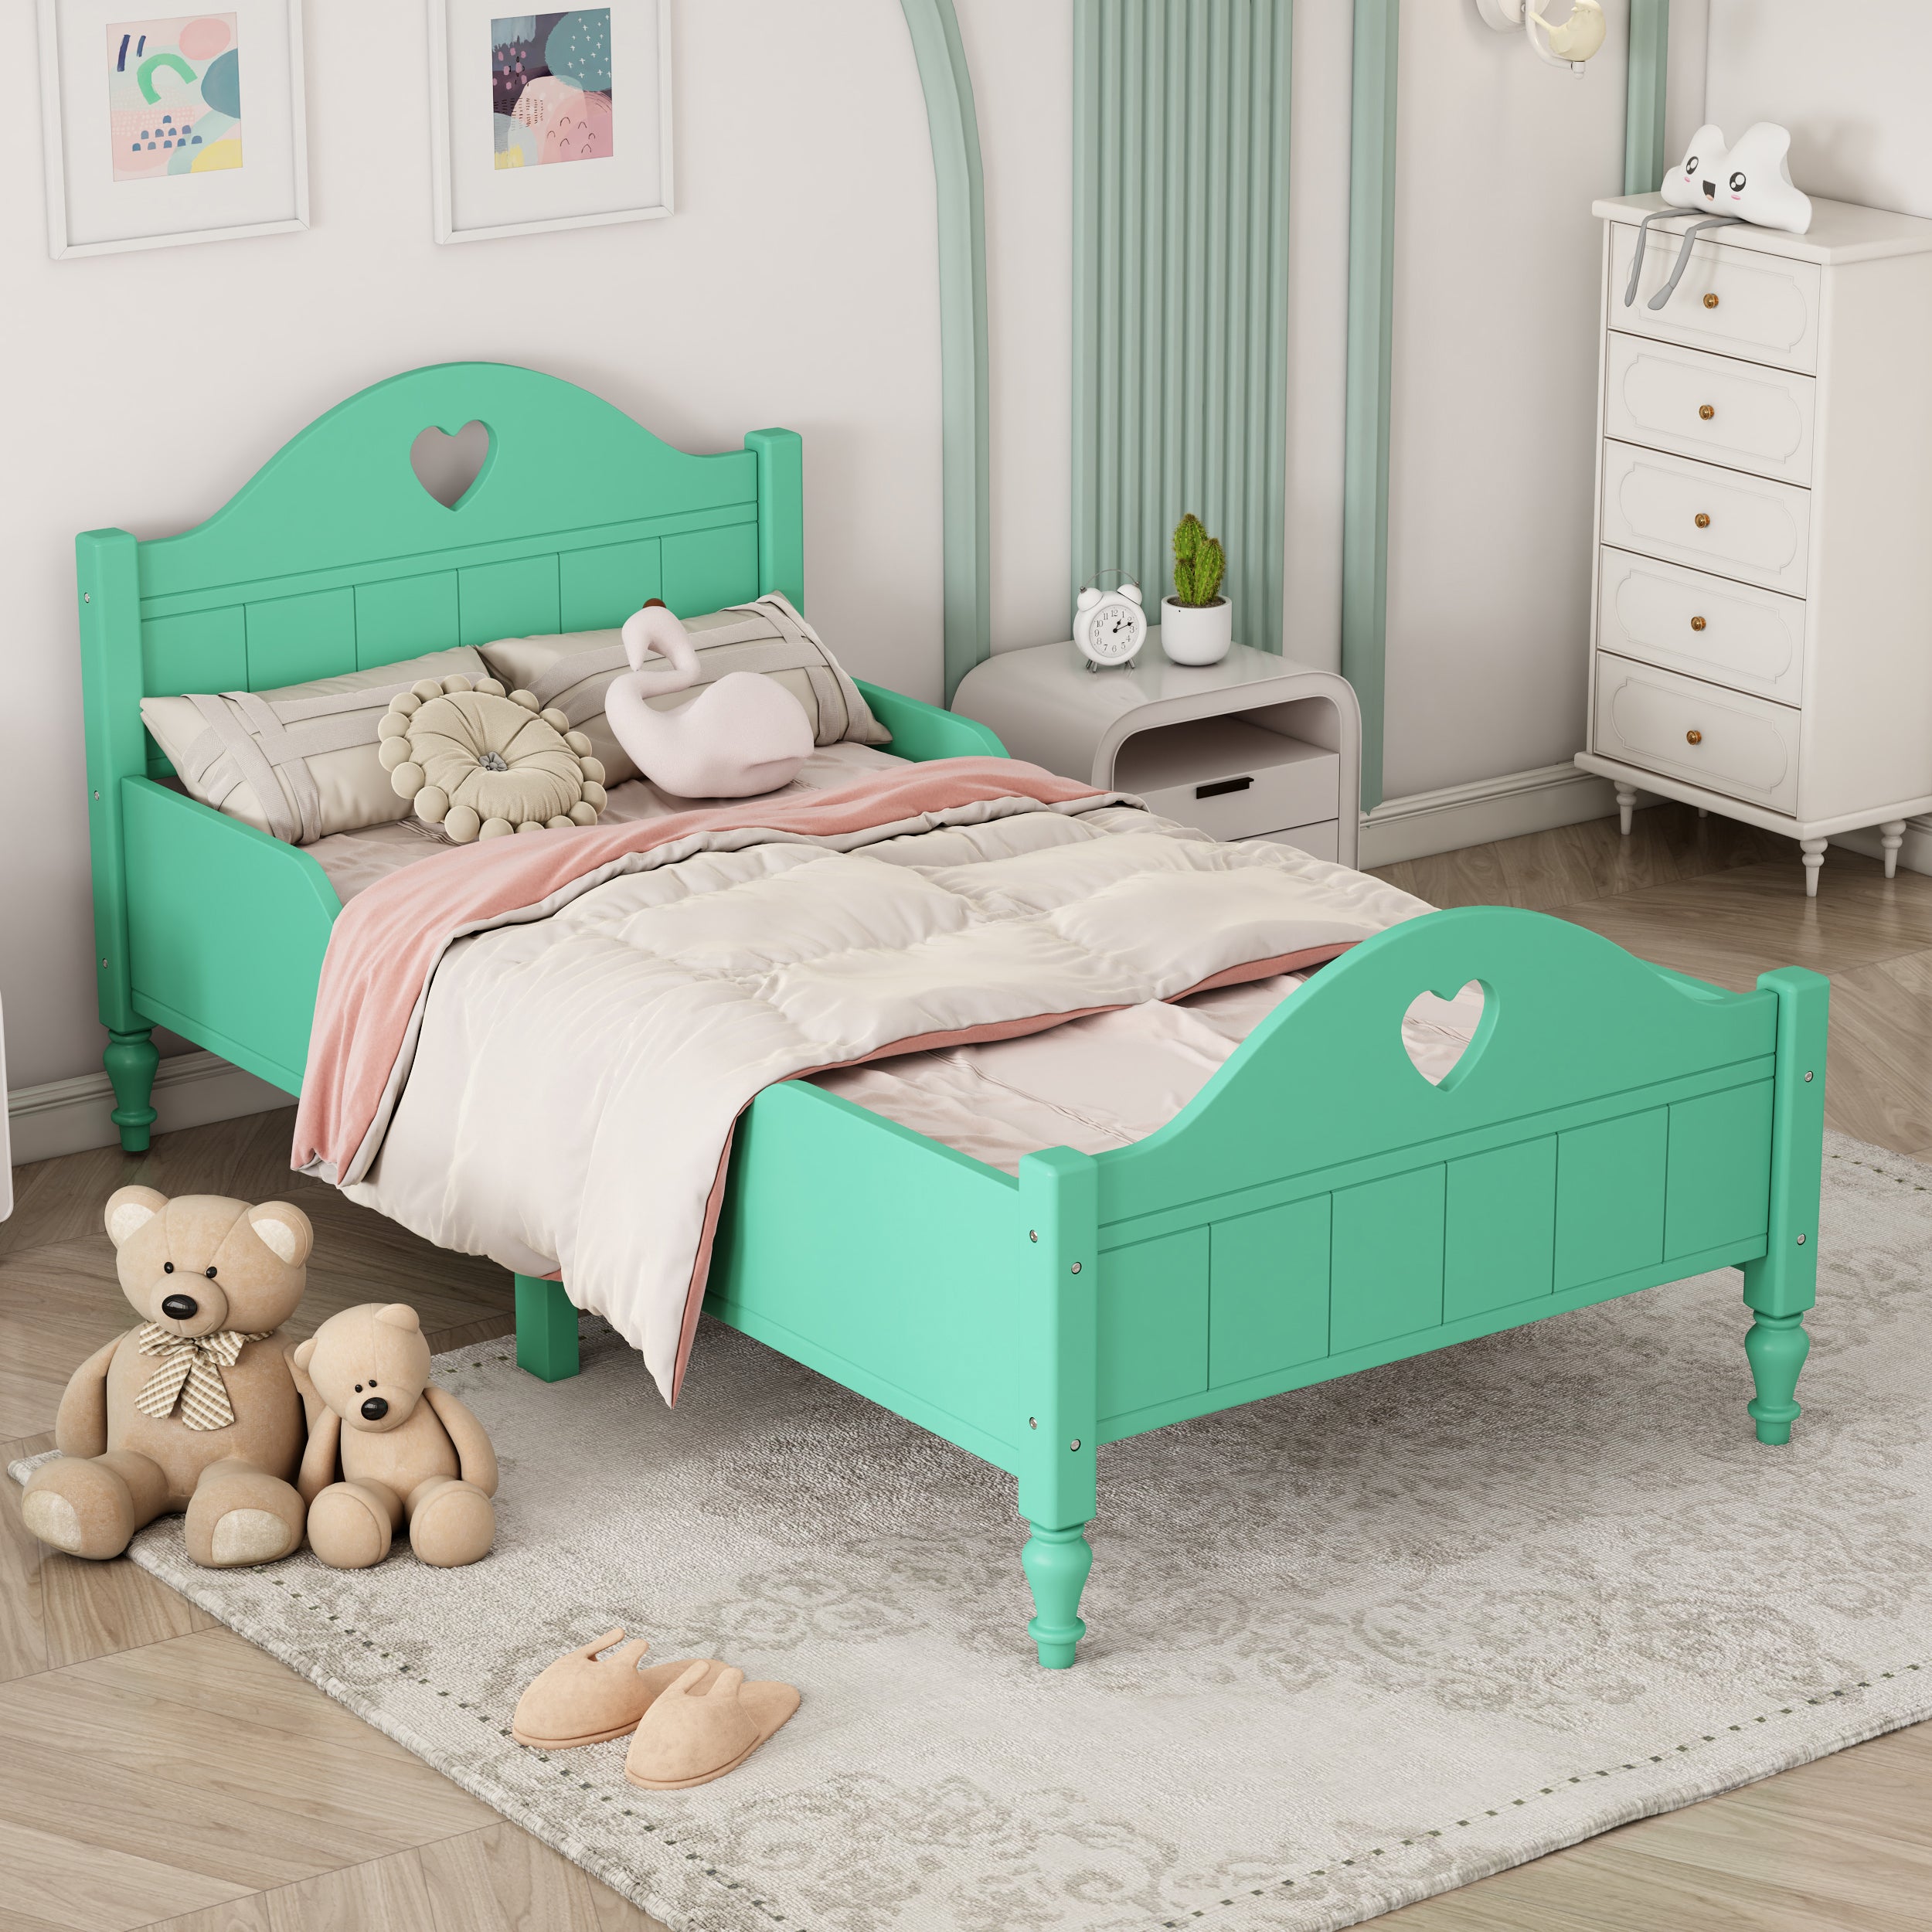 Girl's-Love-Princess-Bed-Macaron-Twin-Size-Toddler-Bed-with-Side-Safety-Rails-,-Sea-soft-Green-Kids-Beds